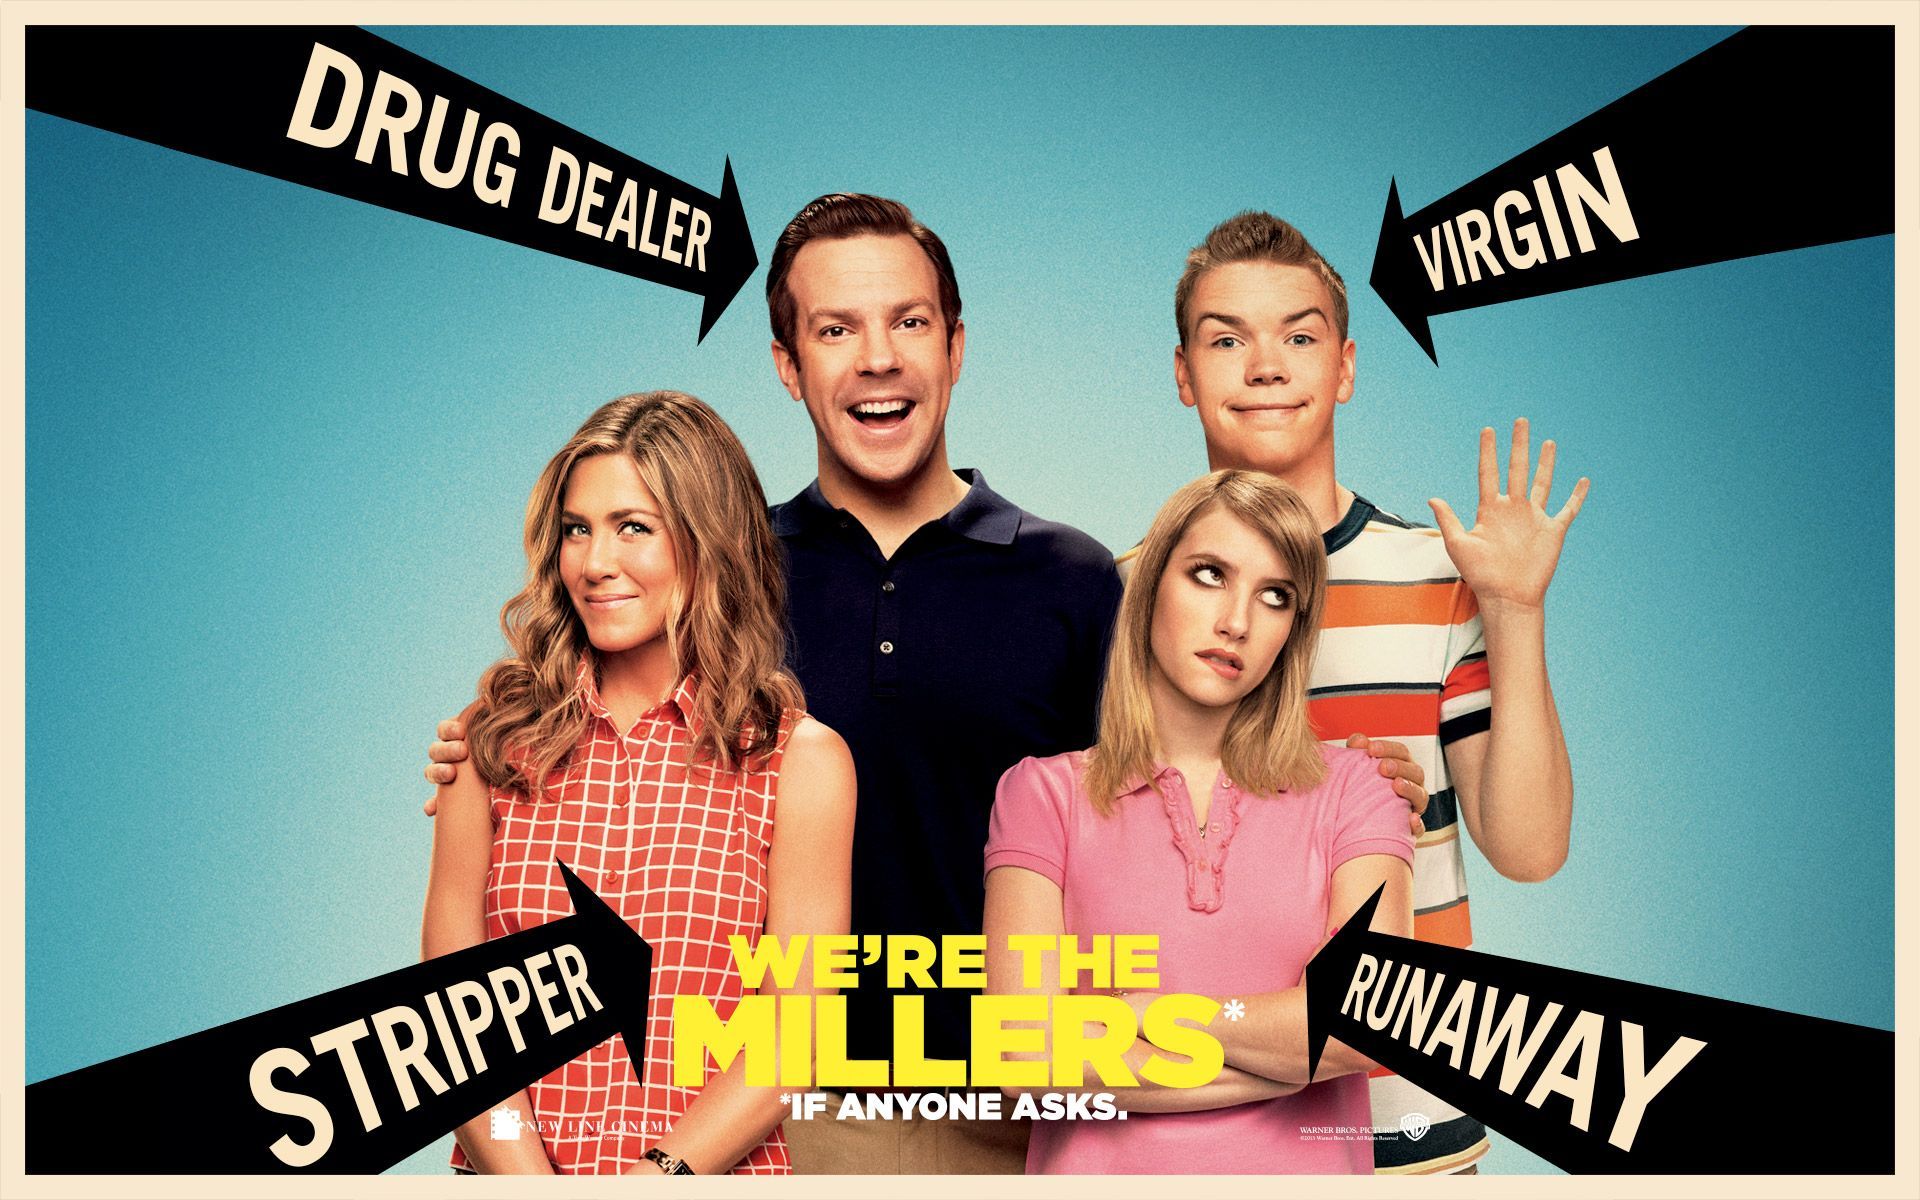 We're The Millers Wallpaper Free We're The Millers Background